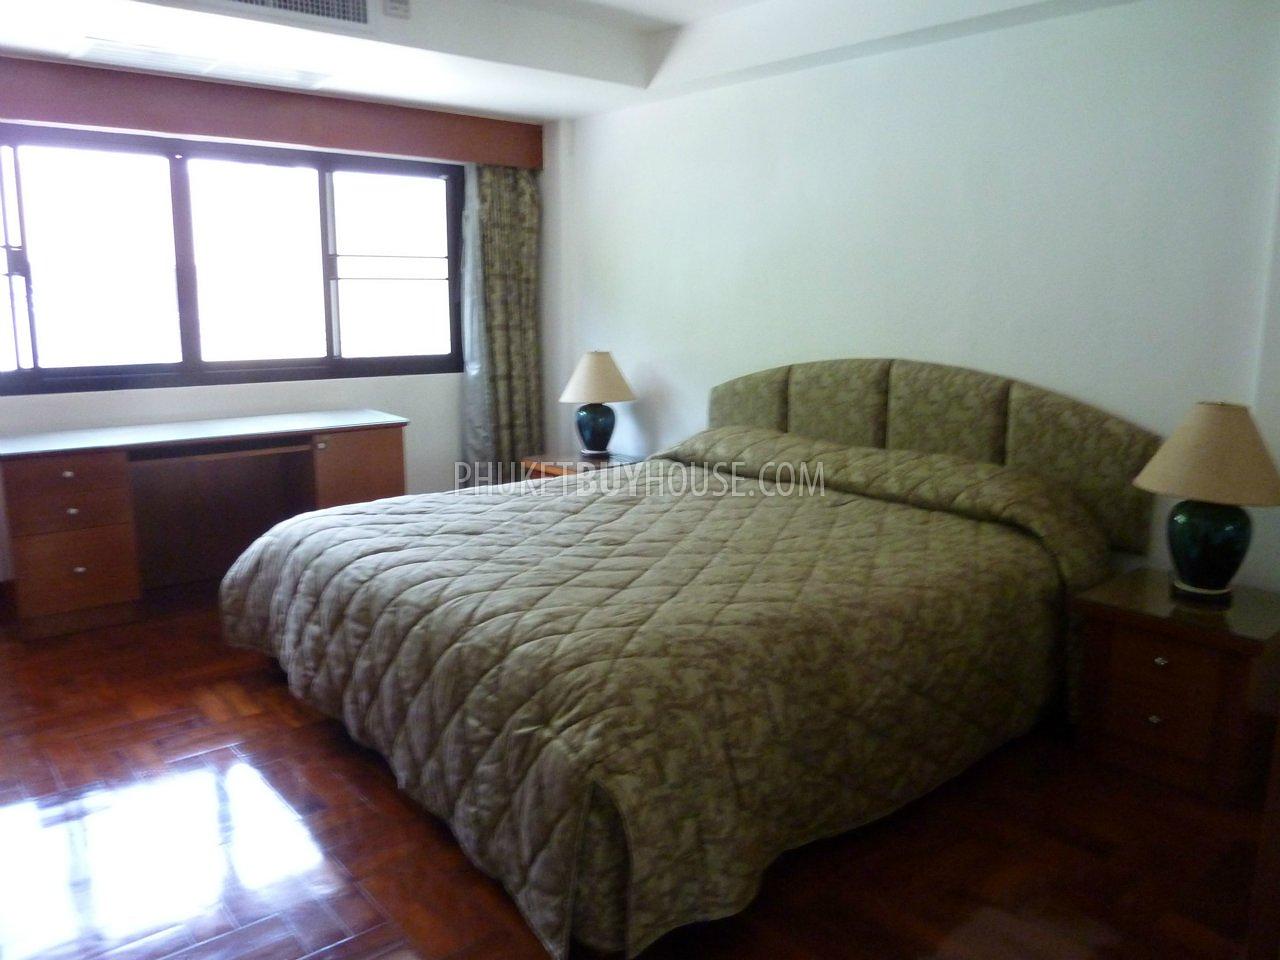 NAI2456: Freehold: Very nice 2 bedr. apartment (top floor), fully furnished, near beautiful Nai Harn Beach. Photo #28